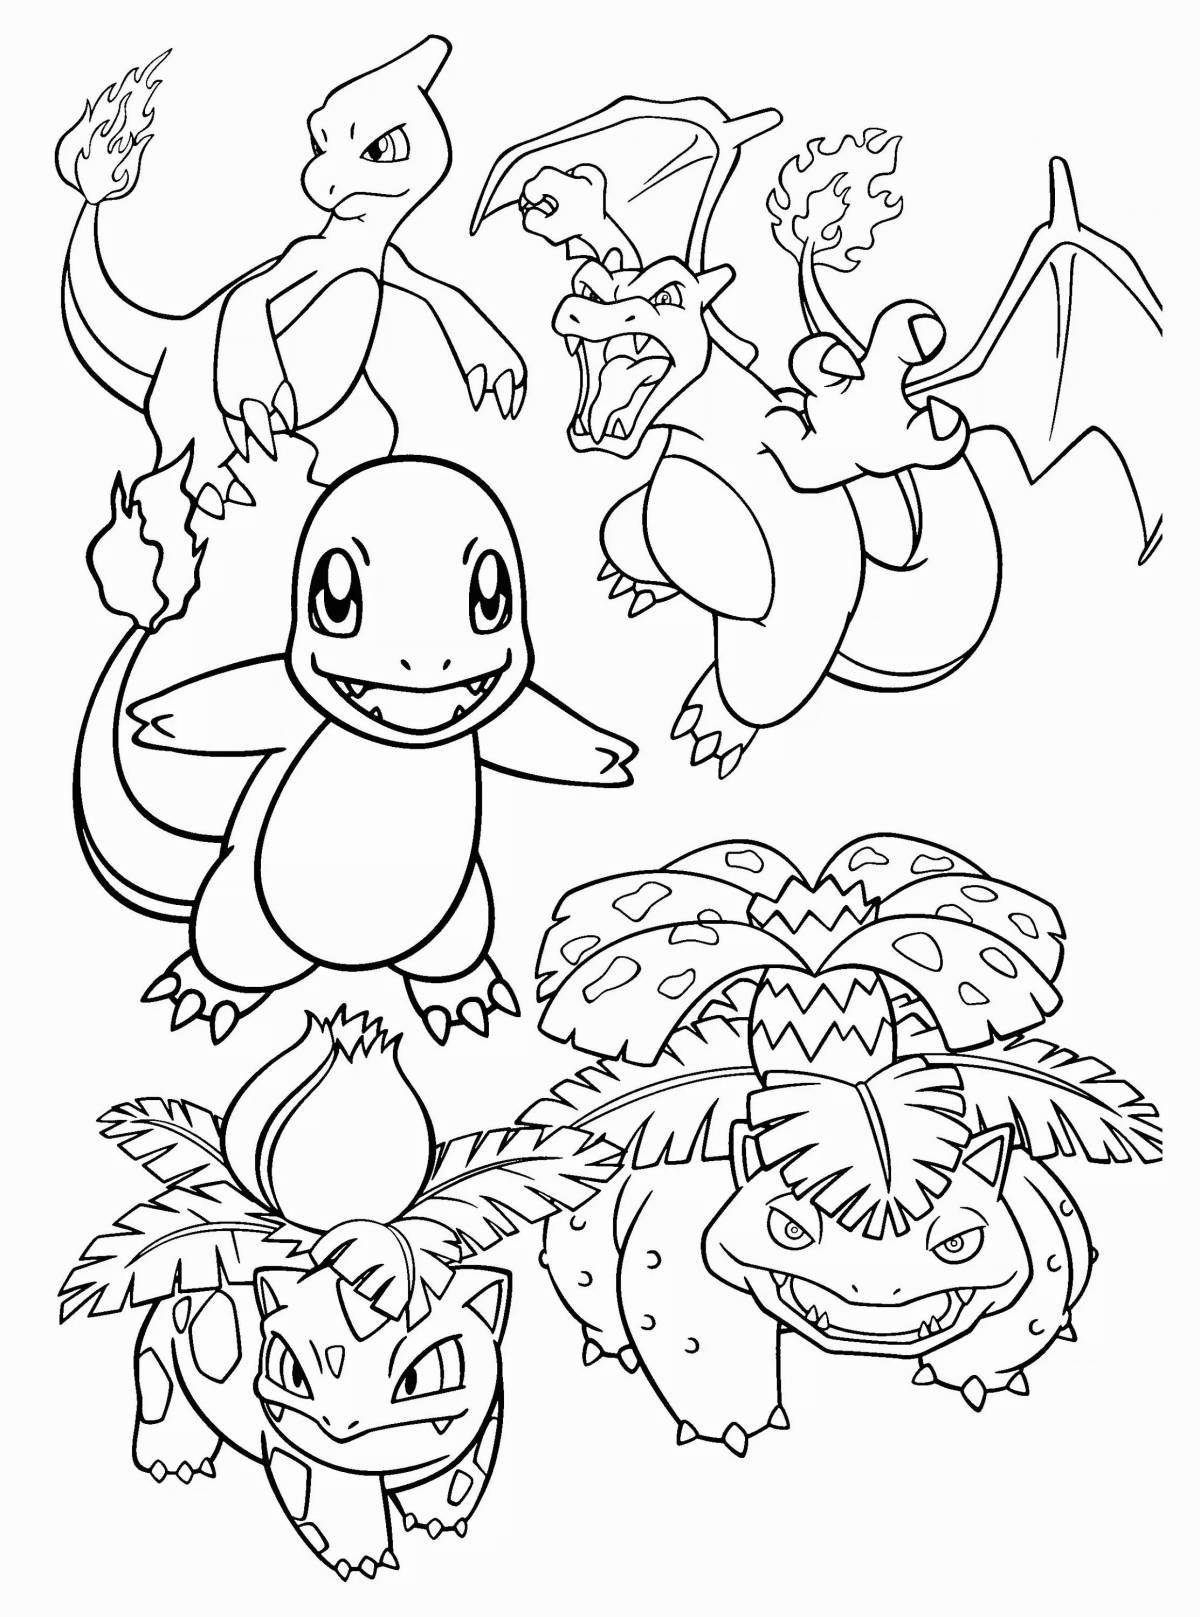 Exciting charmander pokemon coloring book